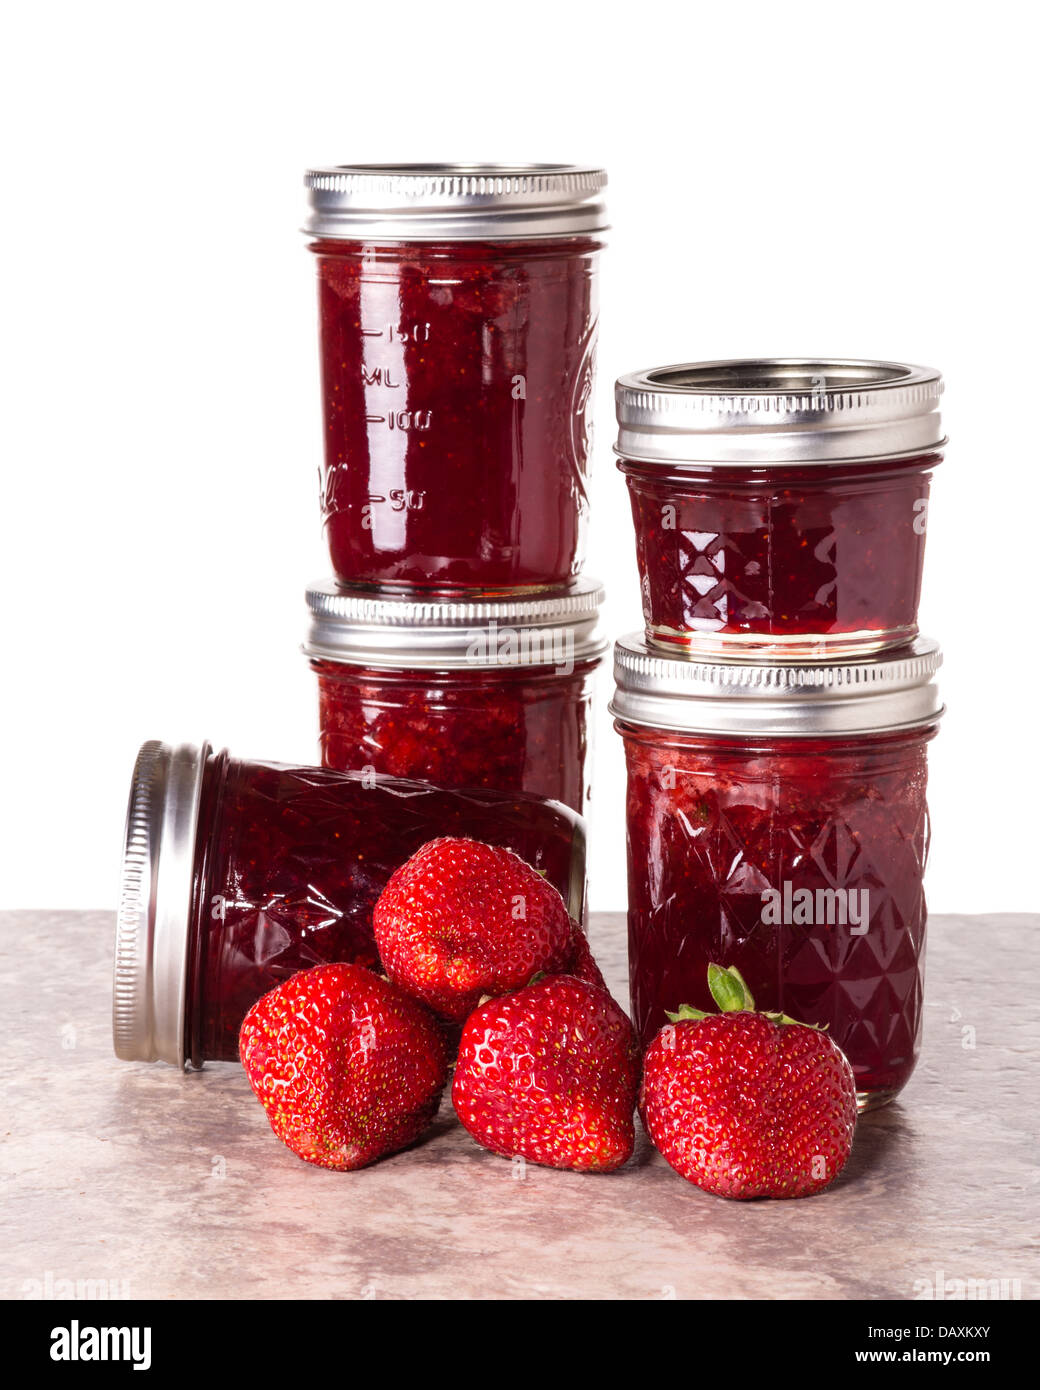 https://c8.alamy.com/comp/DAXKXY/fresh-strawberries-preserved-in-jars-as-homemade-jam-and-jelly-DAXKXY.jpg